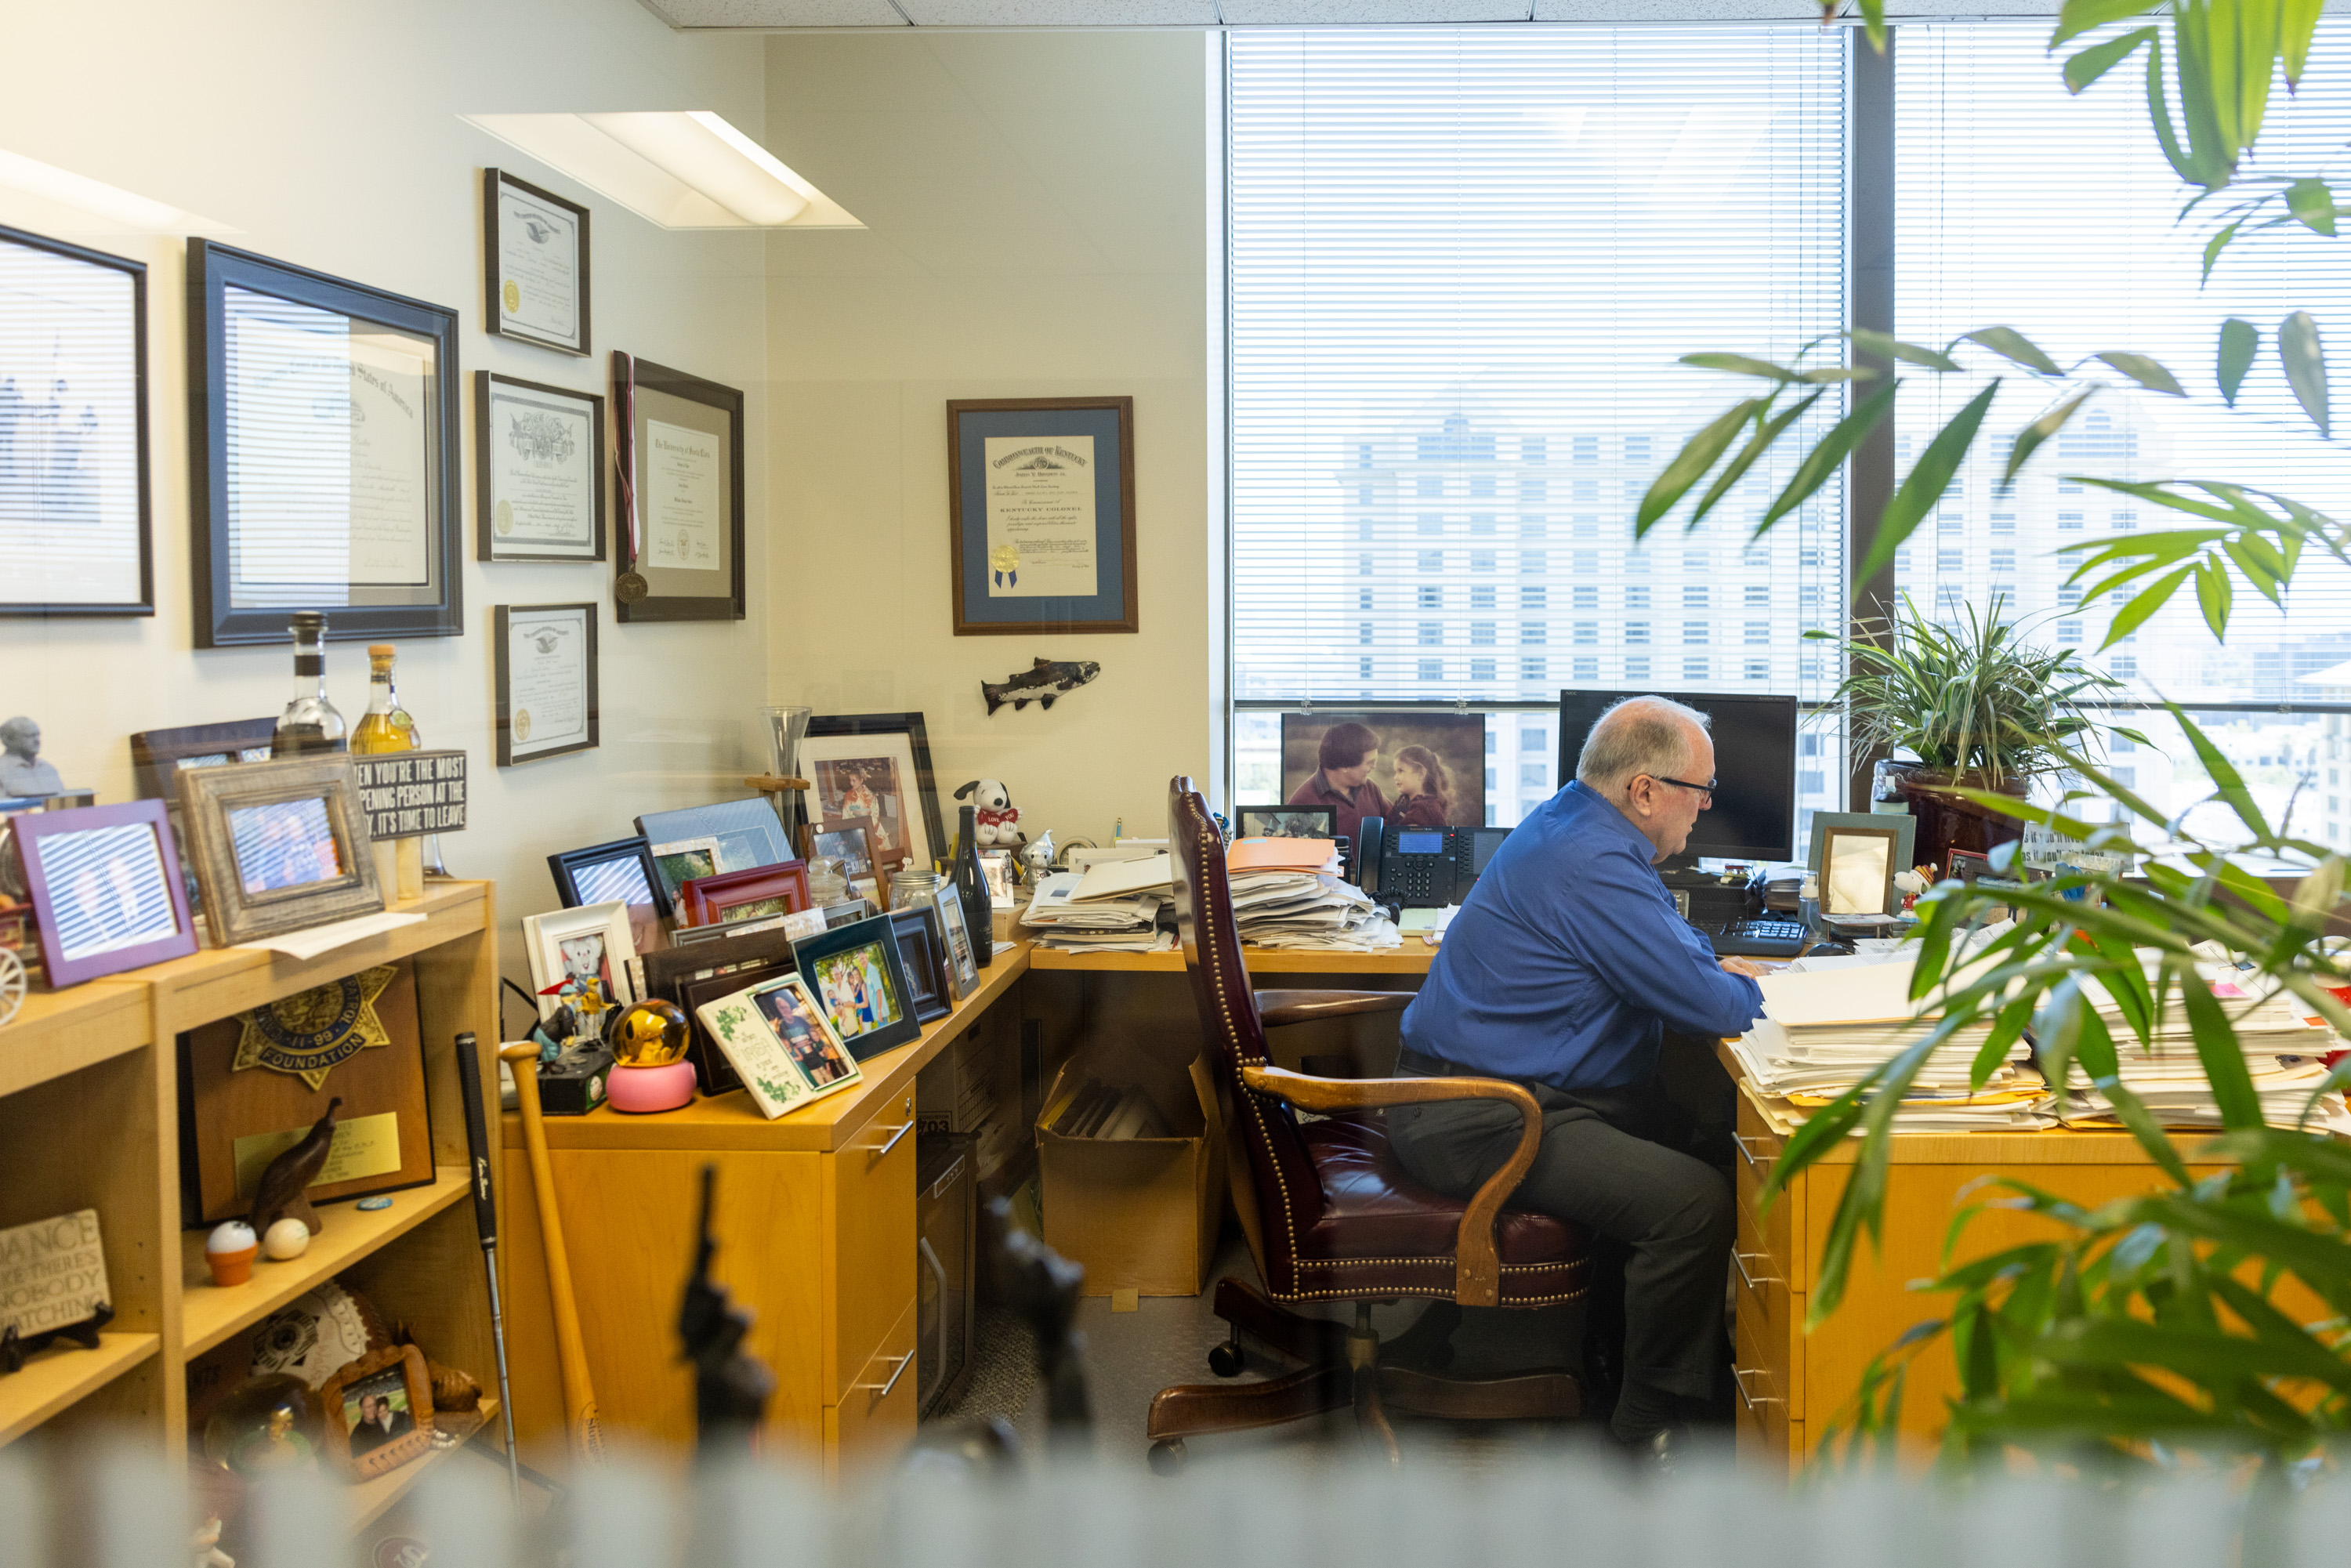 A man in a blue shirt works at a cluttered desk in an office. The room is filled with framed certificates, photos, and plants, with a city view visible through the windows.